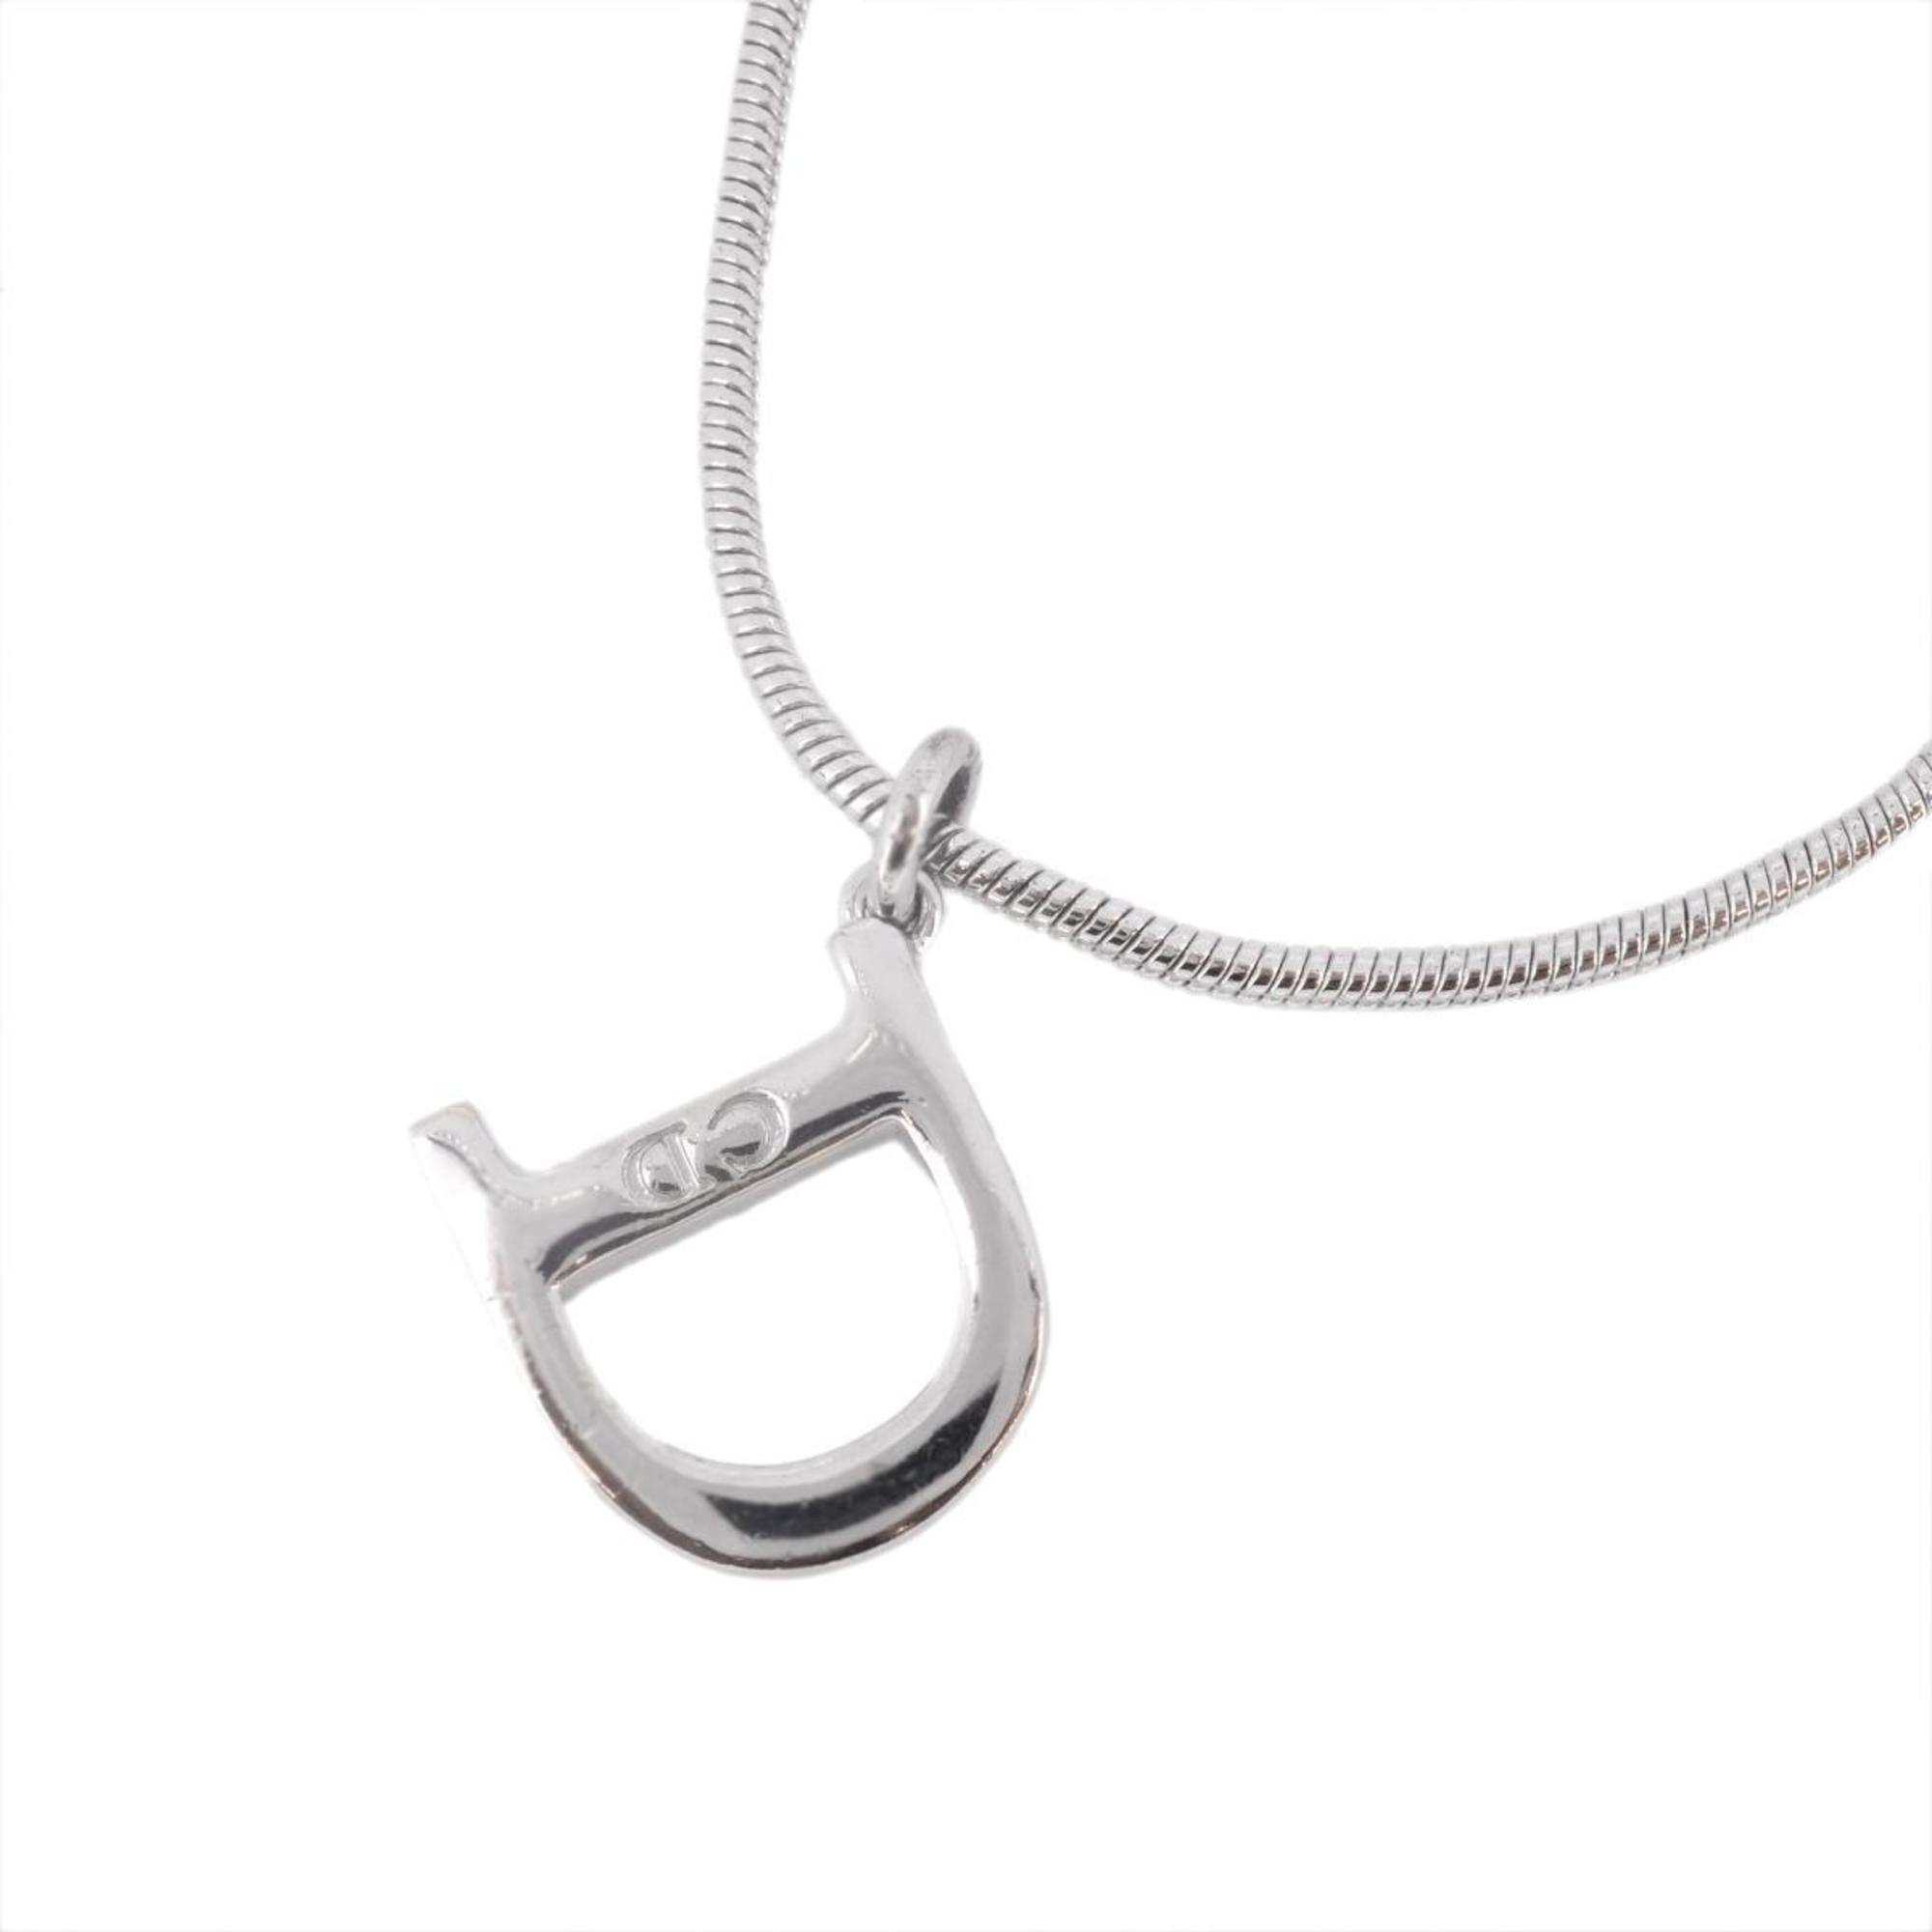 Christian Dior Necklace D Metal Silver Women's